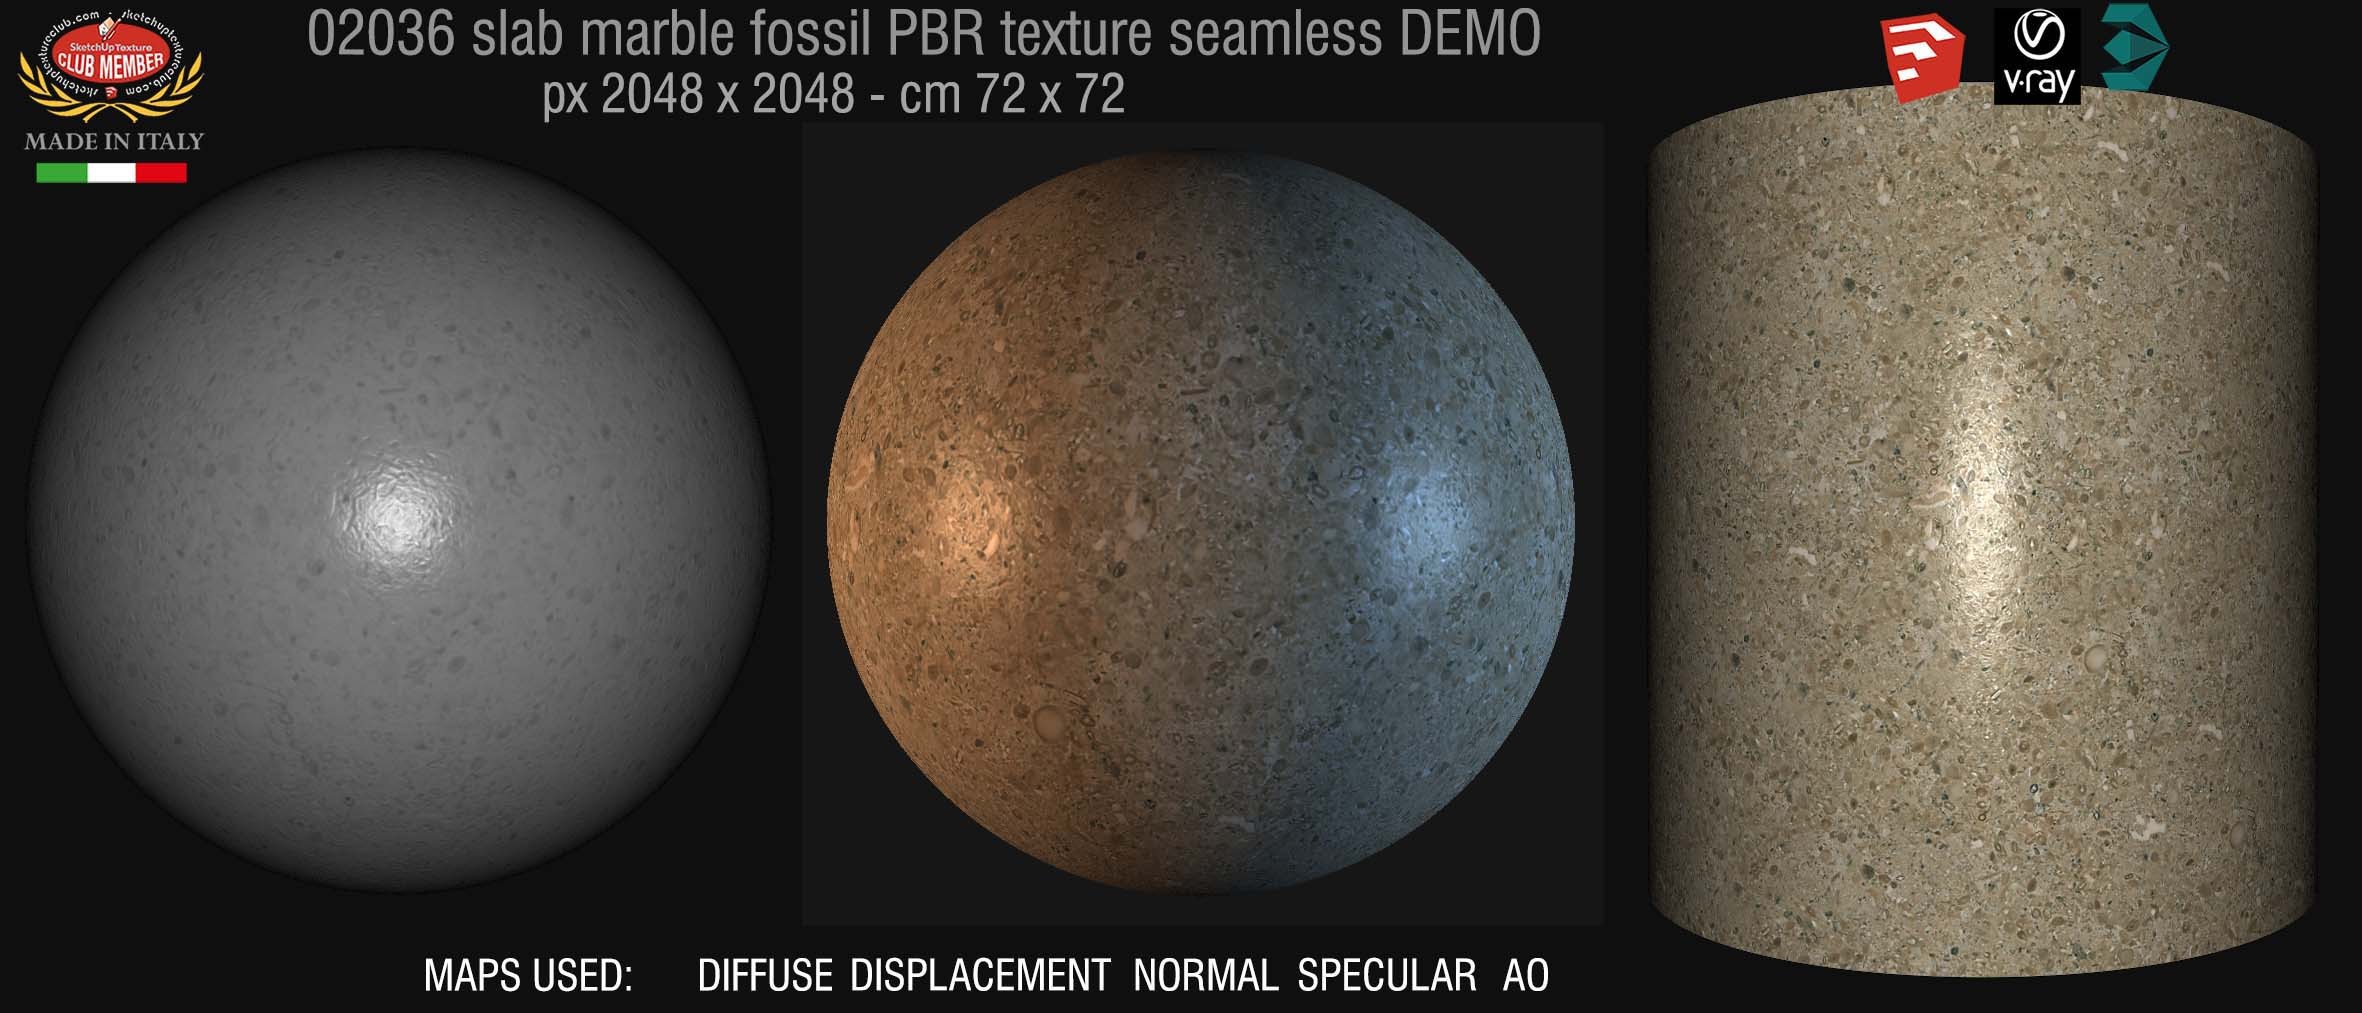 02036 slab marble fossil PBR texture seamless DEMO